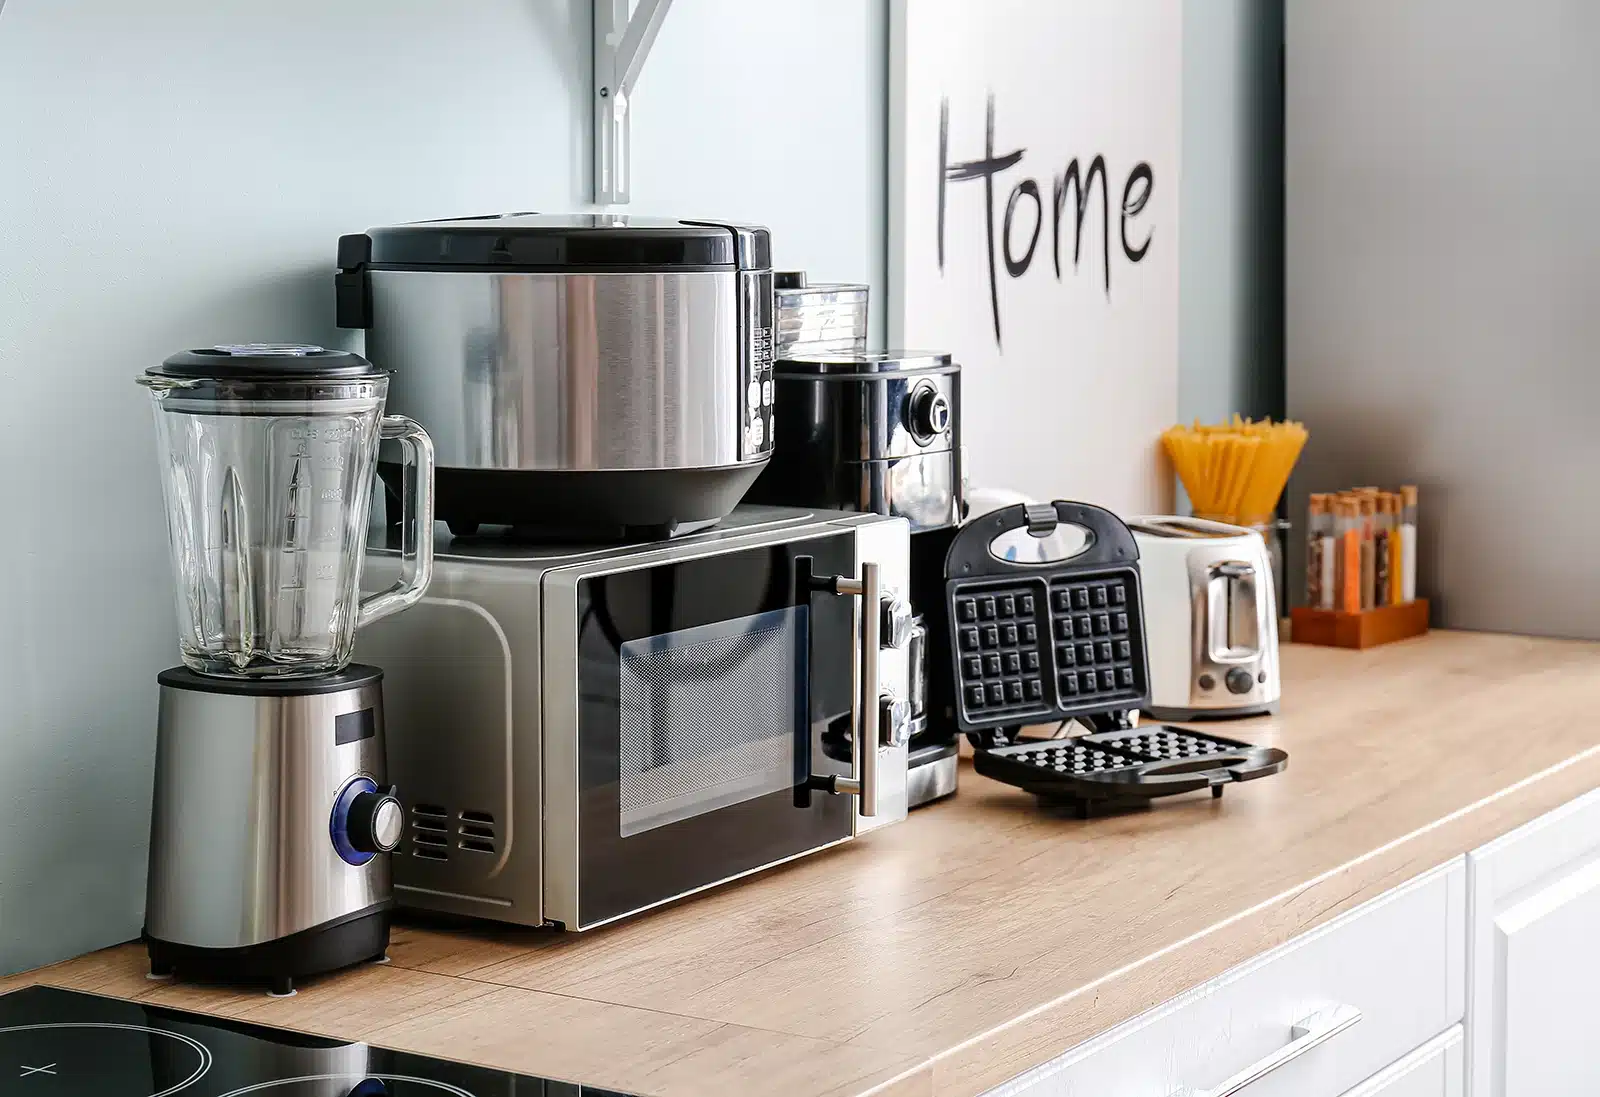 Modern kitchen countertop displaying an array of contemporary appliances including a blender, multi-cooker, coffee maker, and waffle iron, showcasing modern technology in the home.